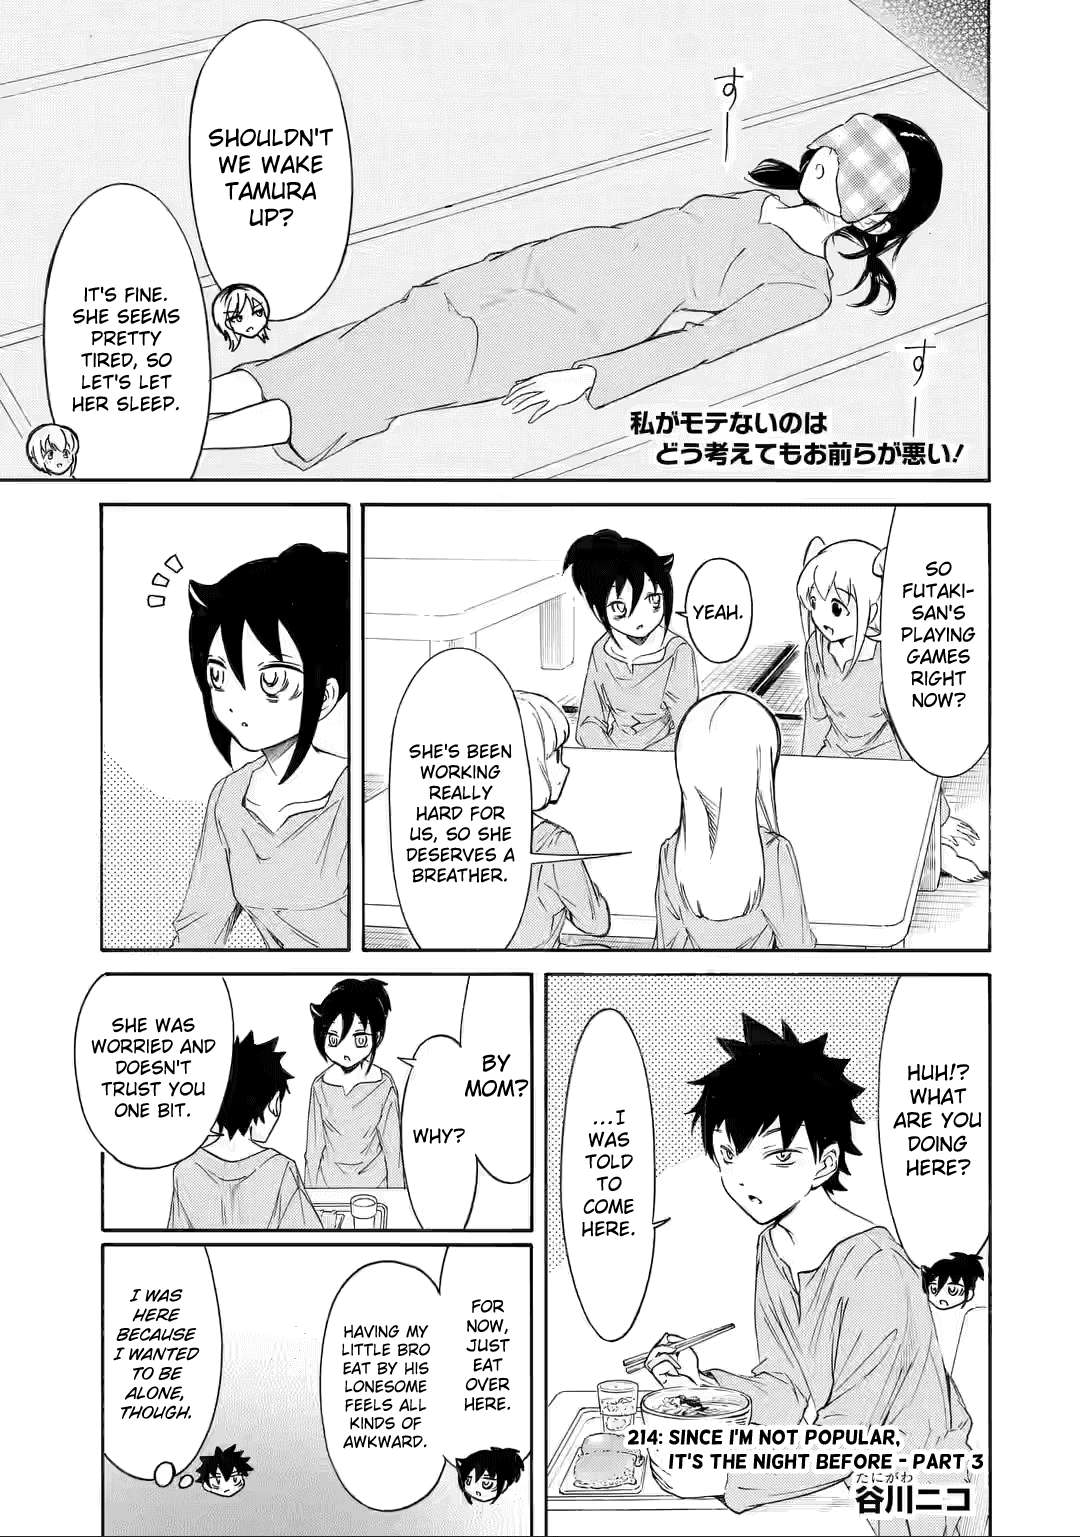 It’s Not My Fault That I’m Not Popular! - chapter 214.3 - #1